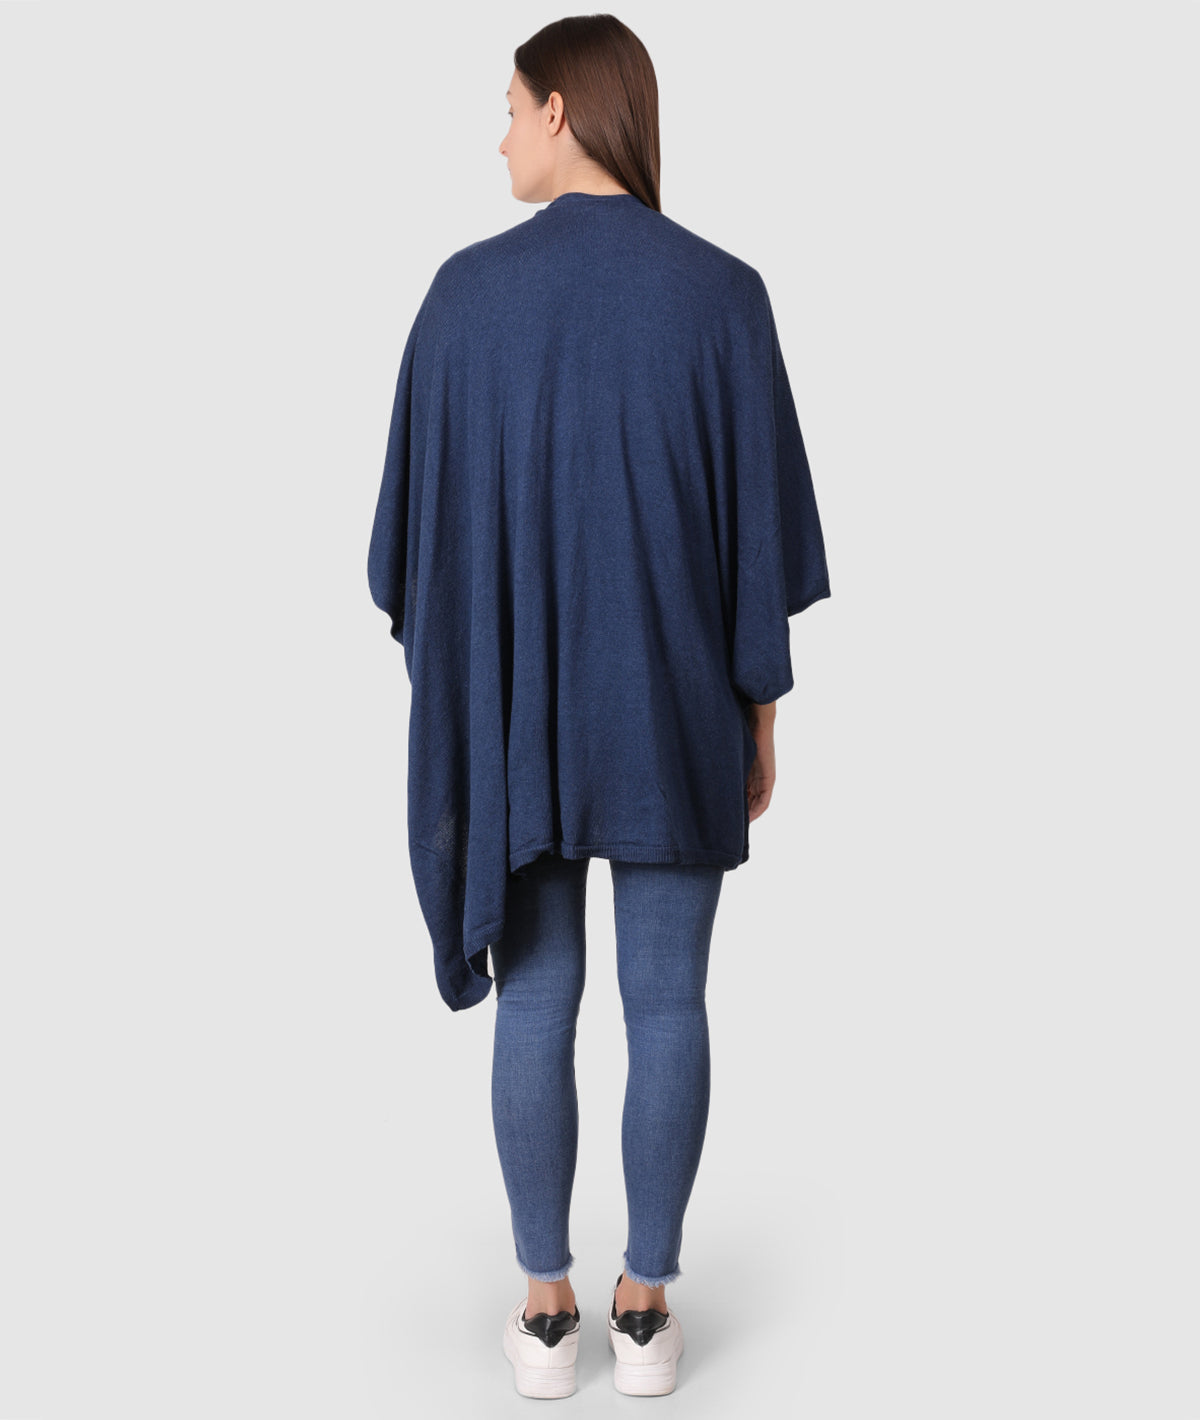 Classic Travel Cape Wrap - Organic Cotton Knitted Light Weight Wrap in Pouch (Navy Melange )